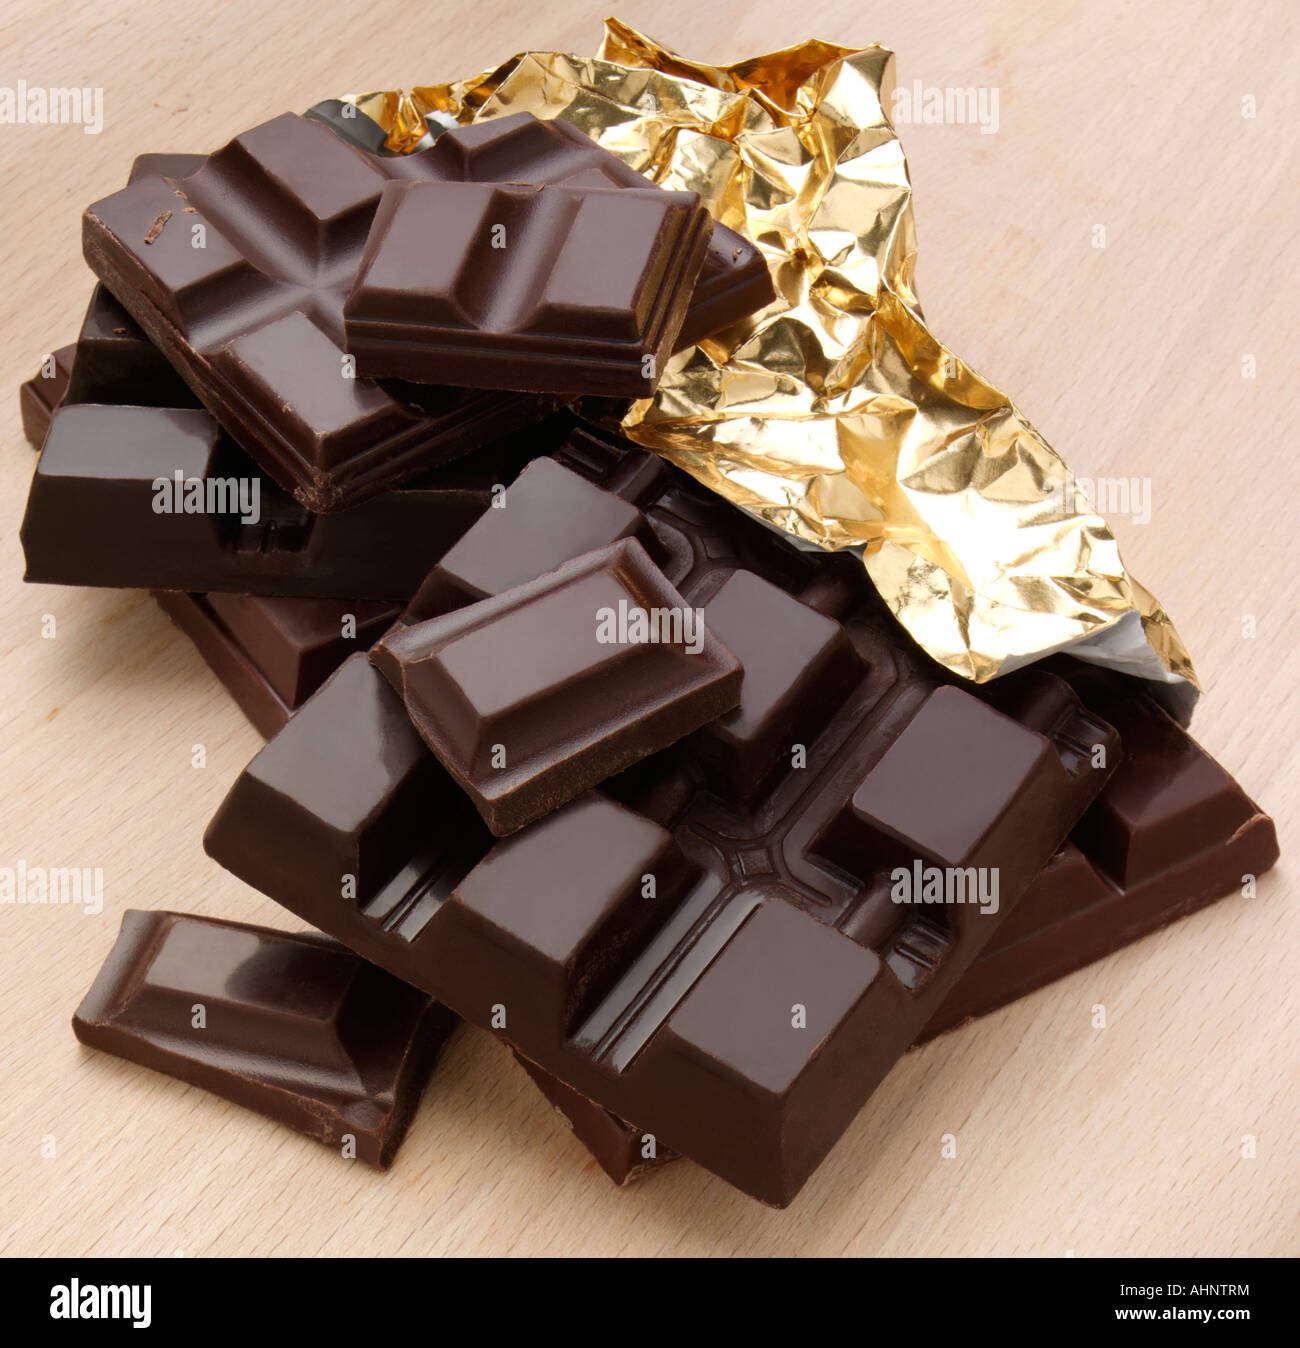 Golden chocolate bars stock photo. Image of paper, isolated - 18134114